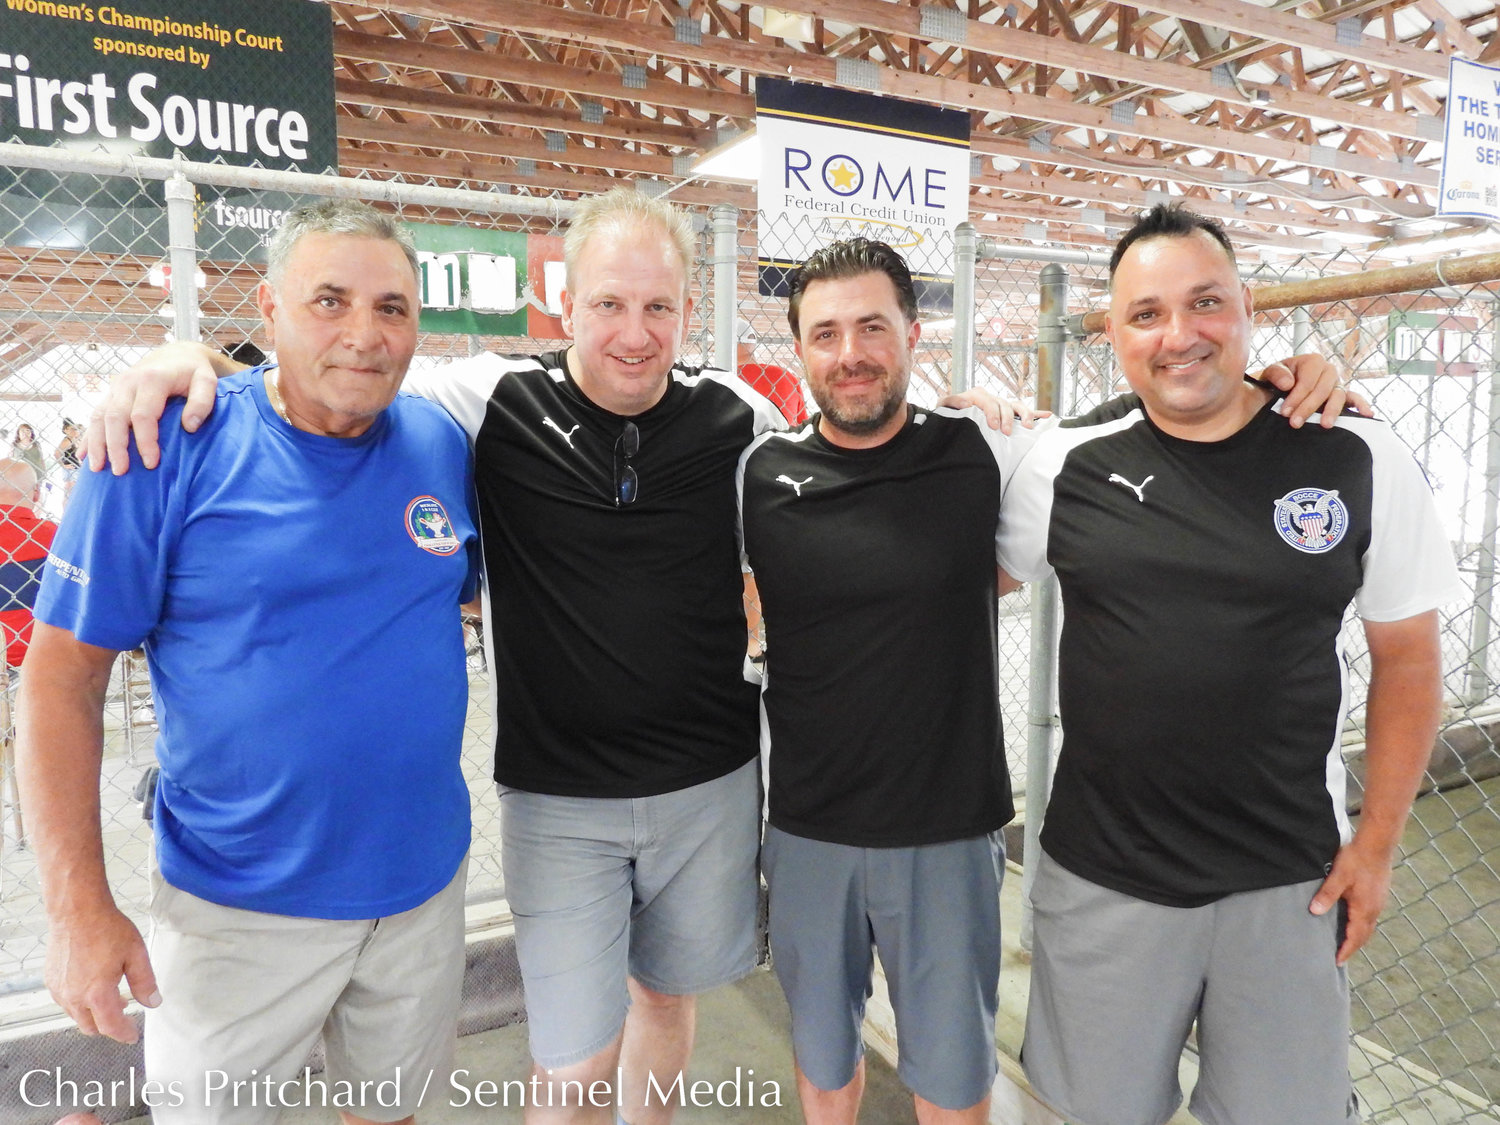 Finalists Tri-State Bocce and Club Vitu Lazio compete in the open division of the 47th World Series of Bocce Sunday at sun-drenched Toccolana Club in Rome. Pictured are the men's division champions, Club Vitu Lazio, comprised of Felice Scala, left, Marco Cignarale, Pete Russo, and Natale Scala.